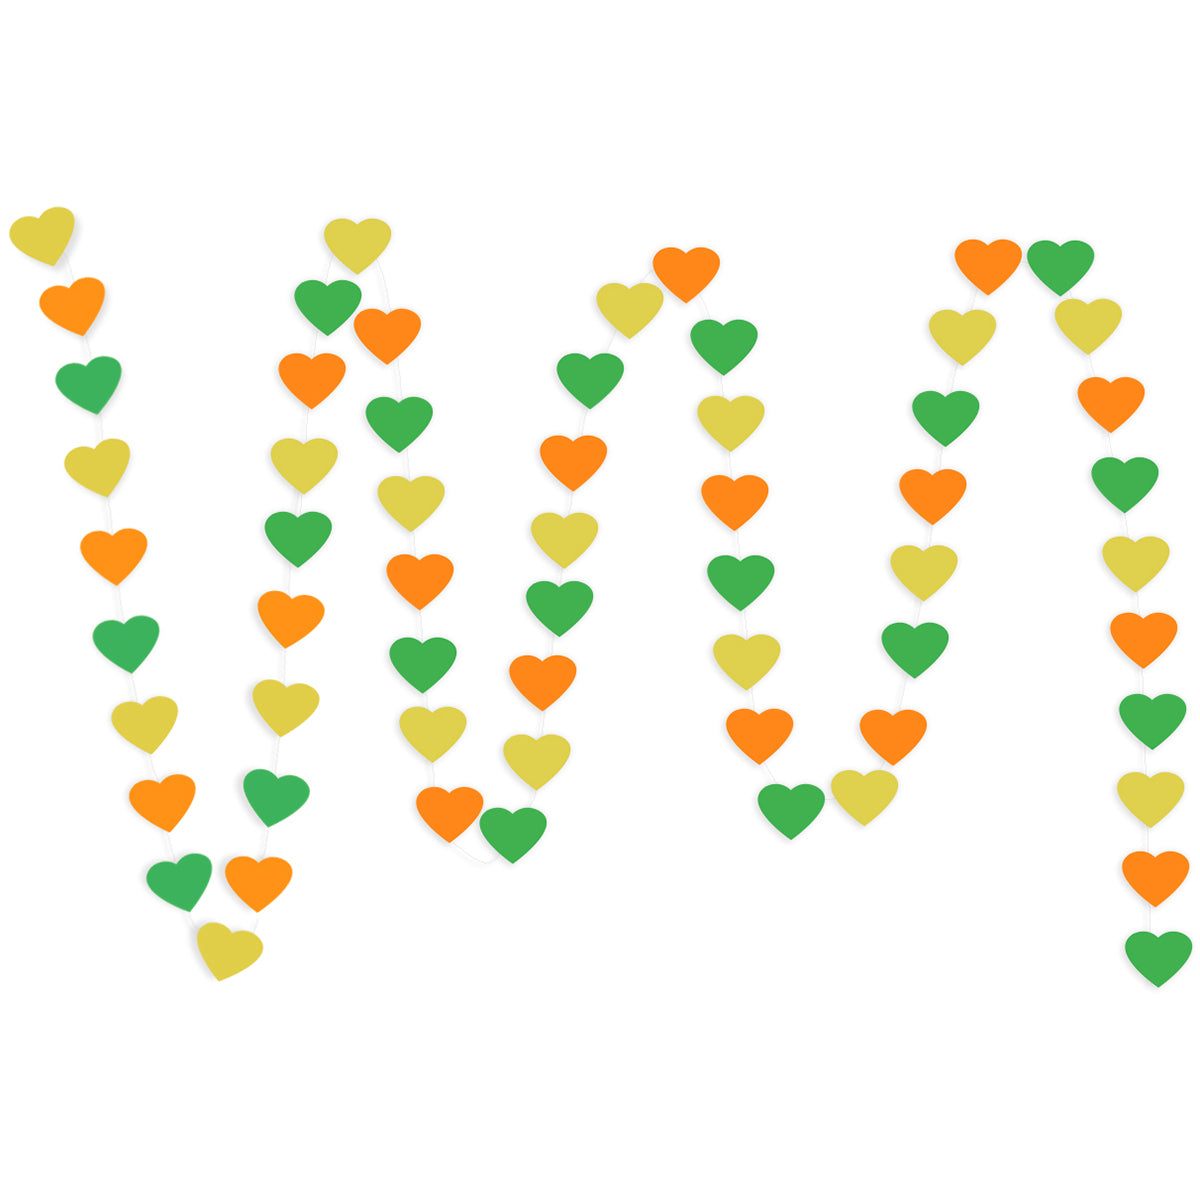 A string of Yellow, Orange, Green Hearts Paper Garland show with a white background. 